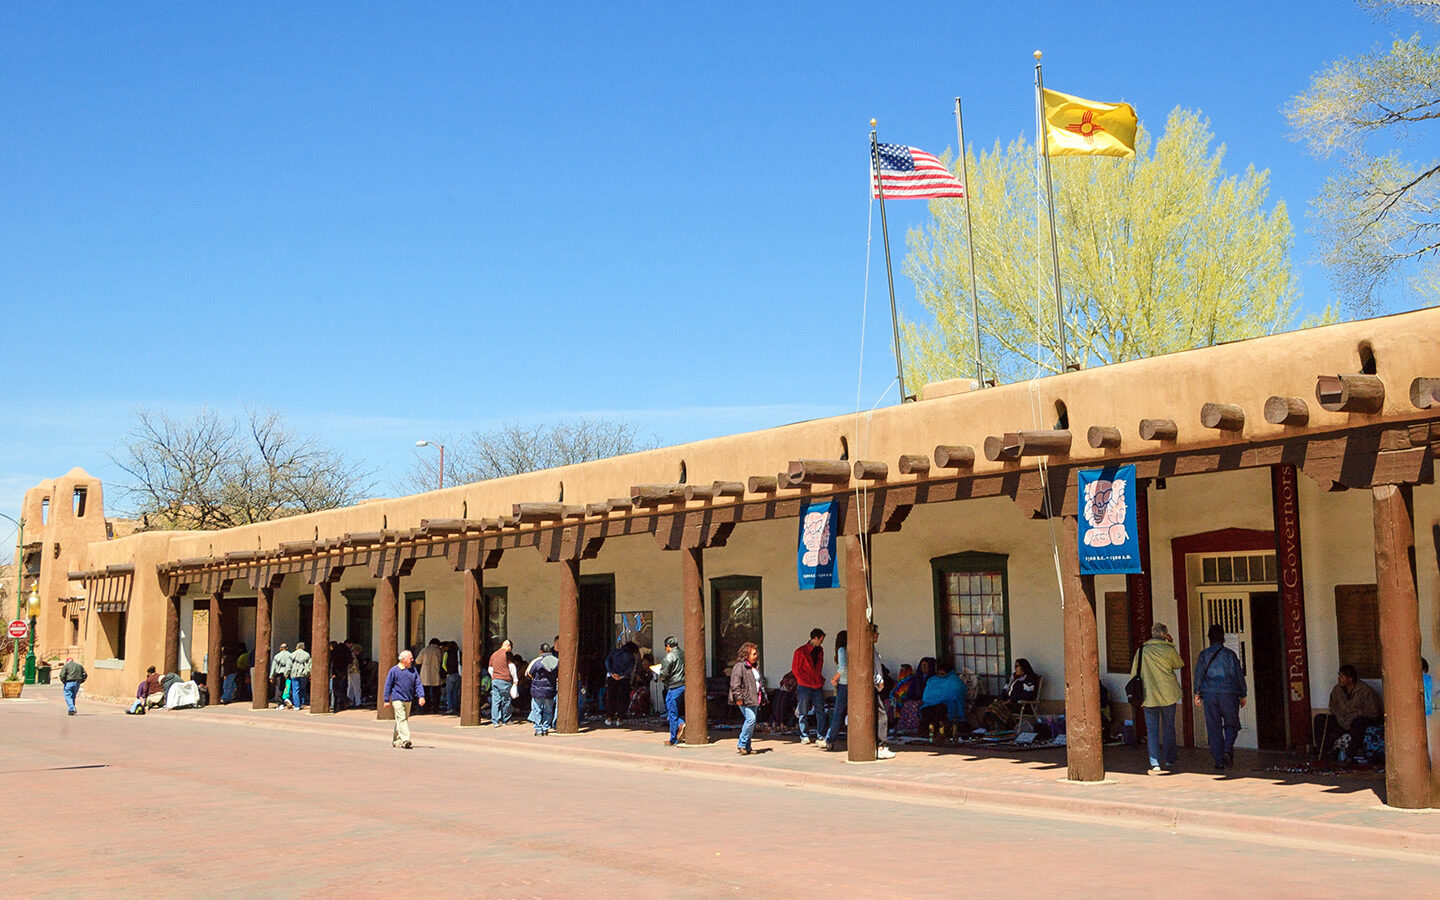 The Palace of the Governors and craft market in Santa Fe